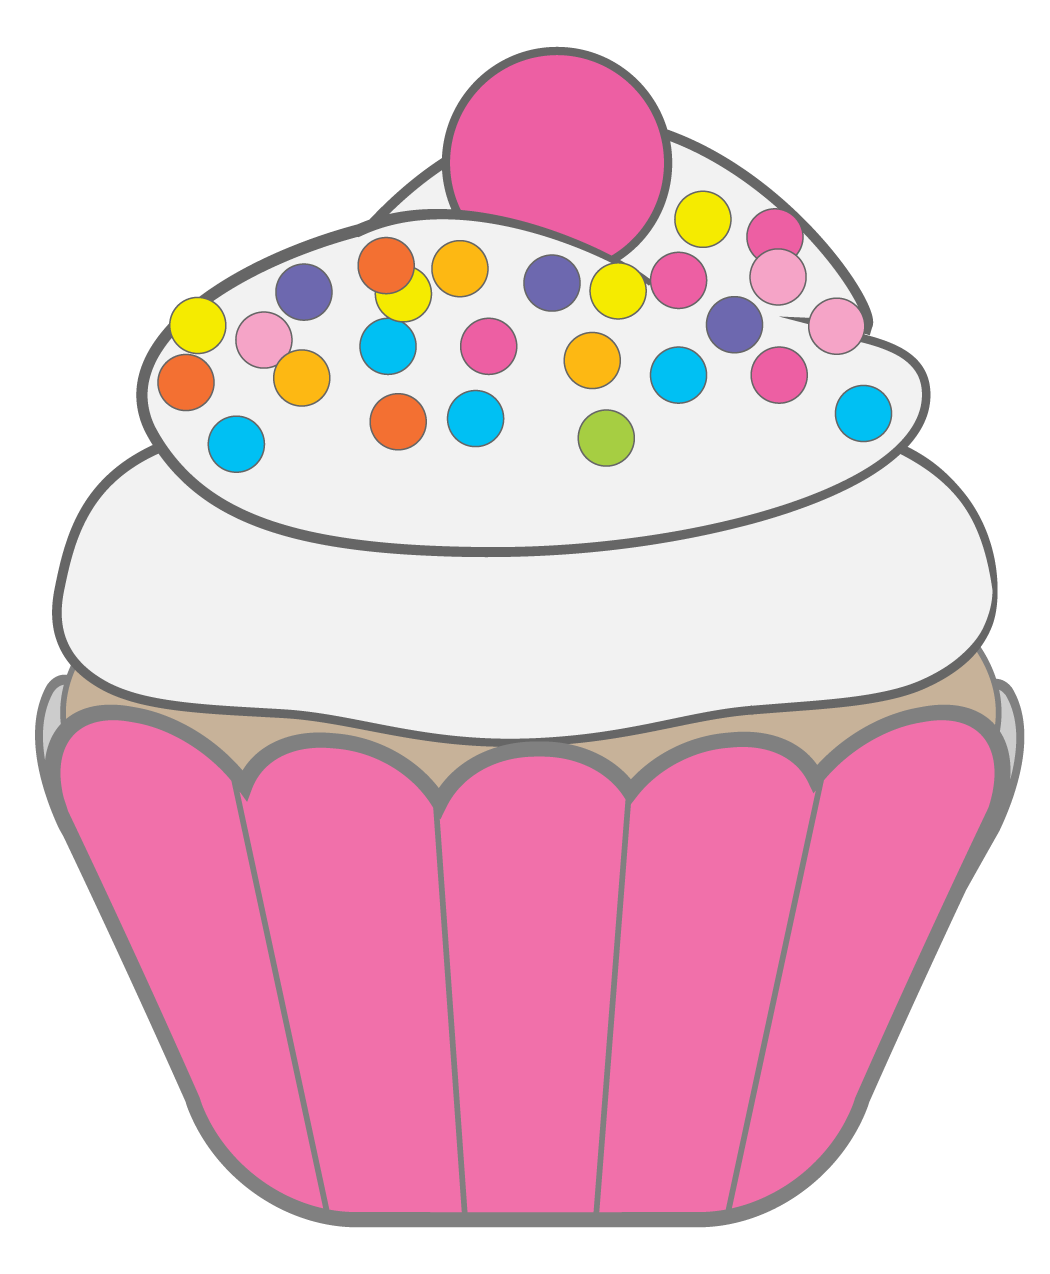 muffins clipart giant cupcake